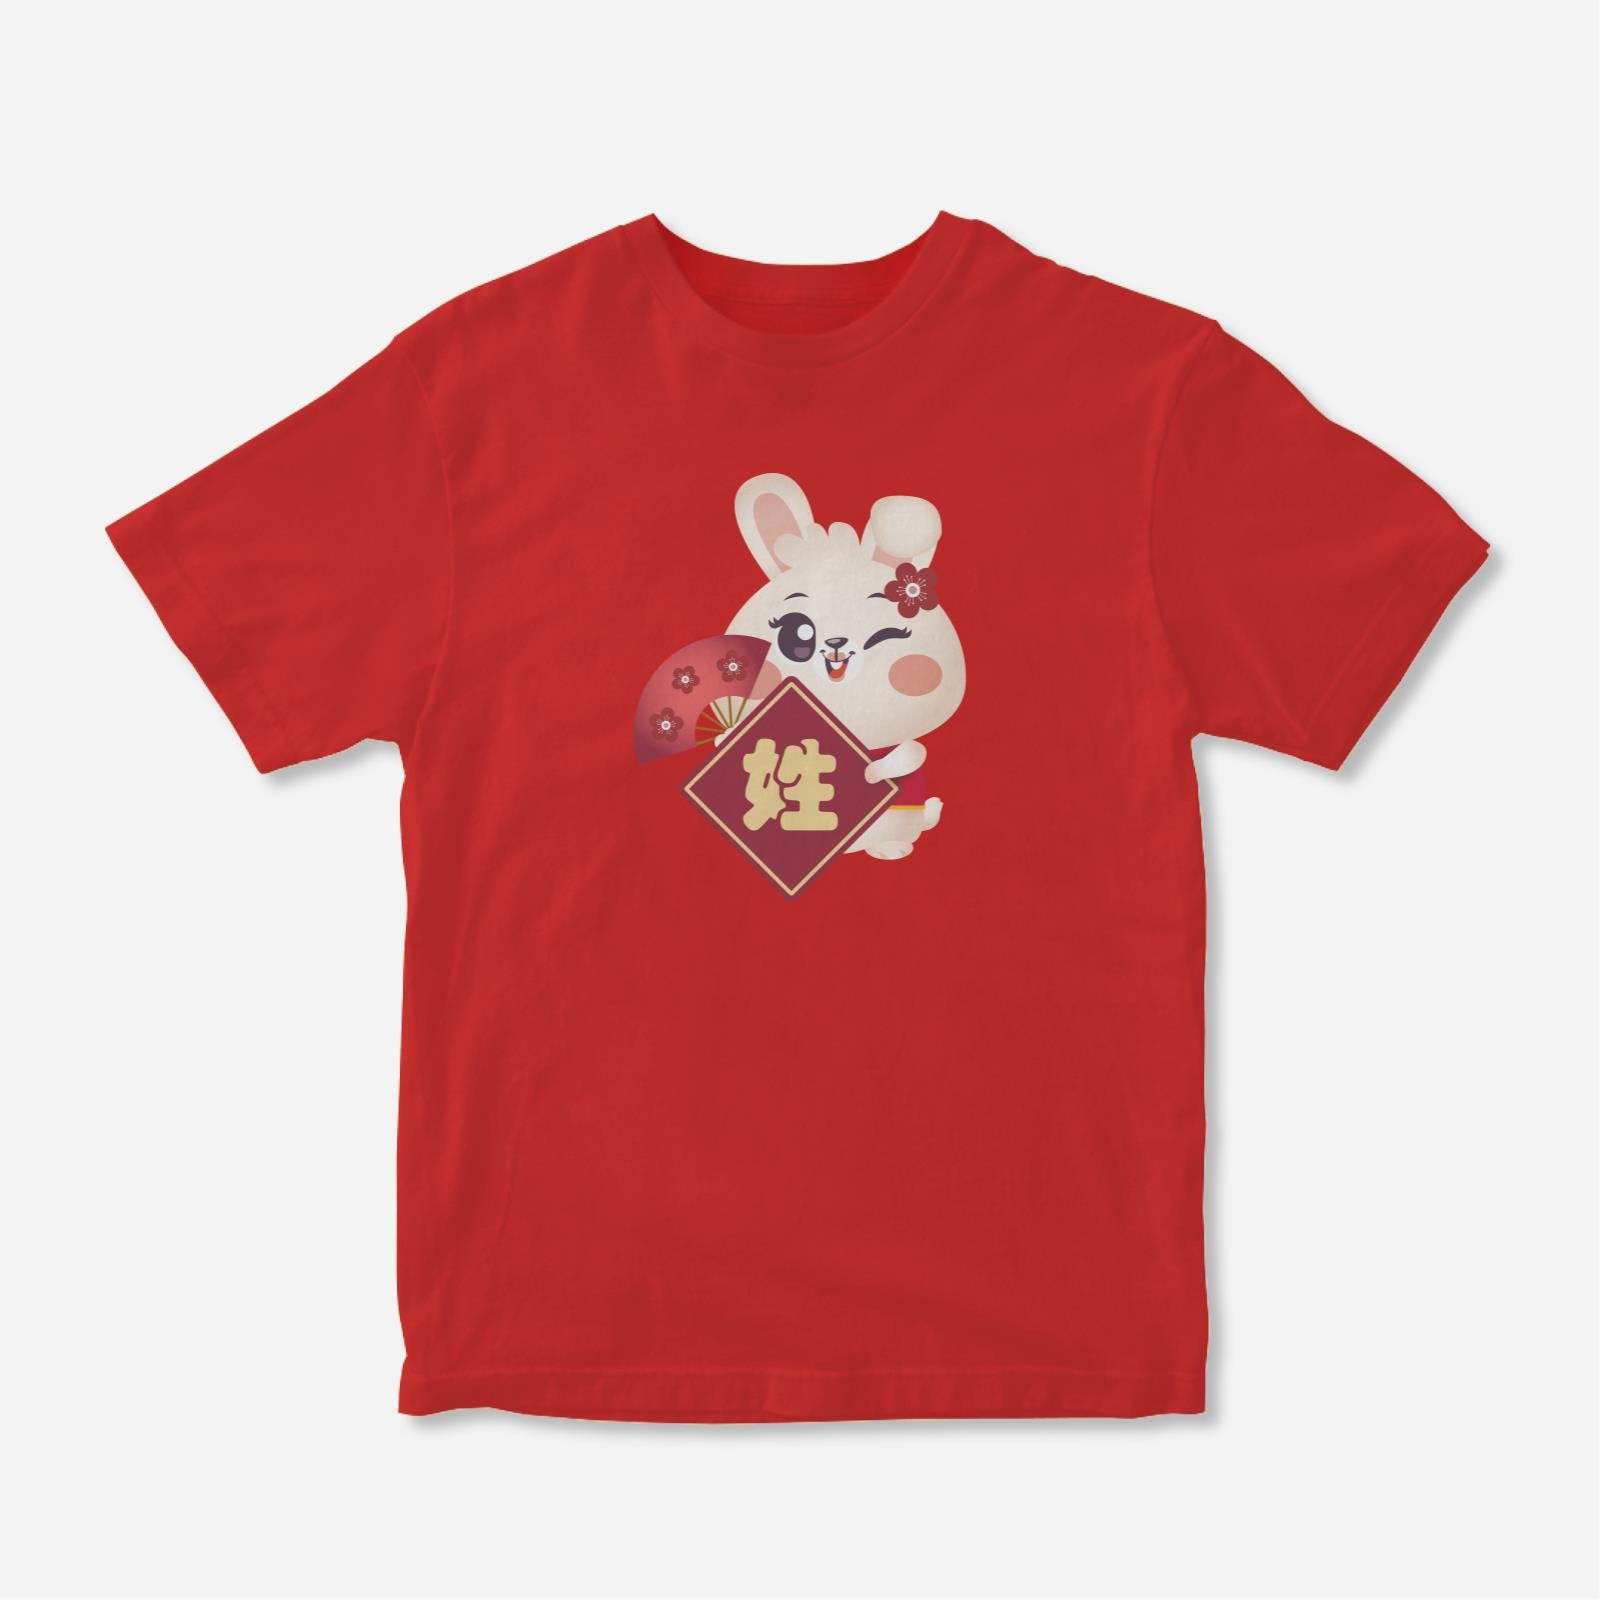 Cny Rabbit Family - Surname Mommy Rabbit Kids Tee Shirt with Chinese Surname